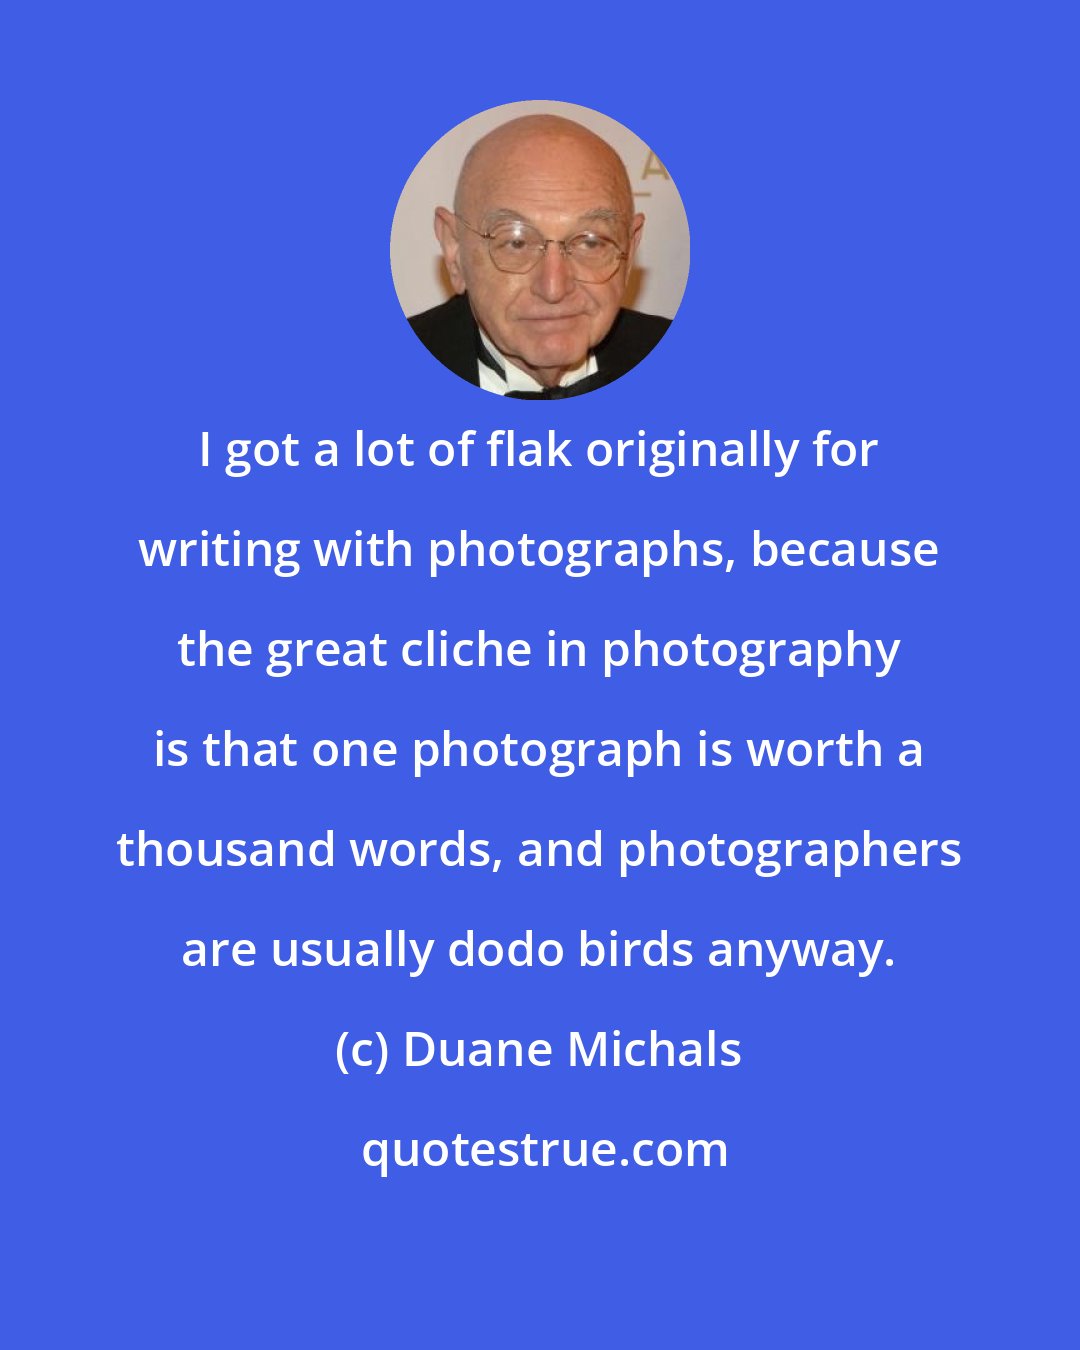 Duane Michals: I got a lot of flak originally for writing with photographs, because the great cliche in photography is that one photograph is worth a thousand words, and photographers are usually dodo birds anyway.